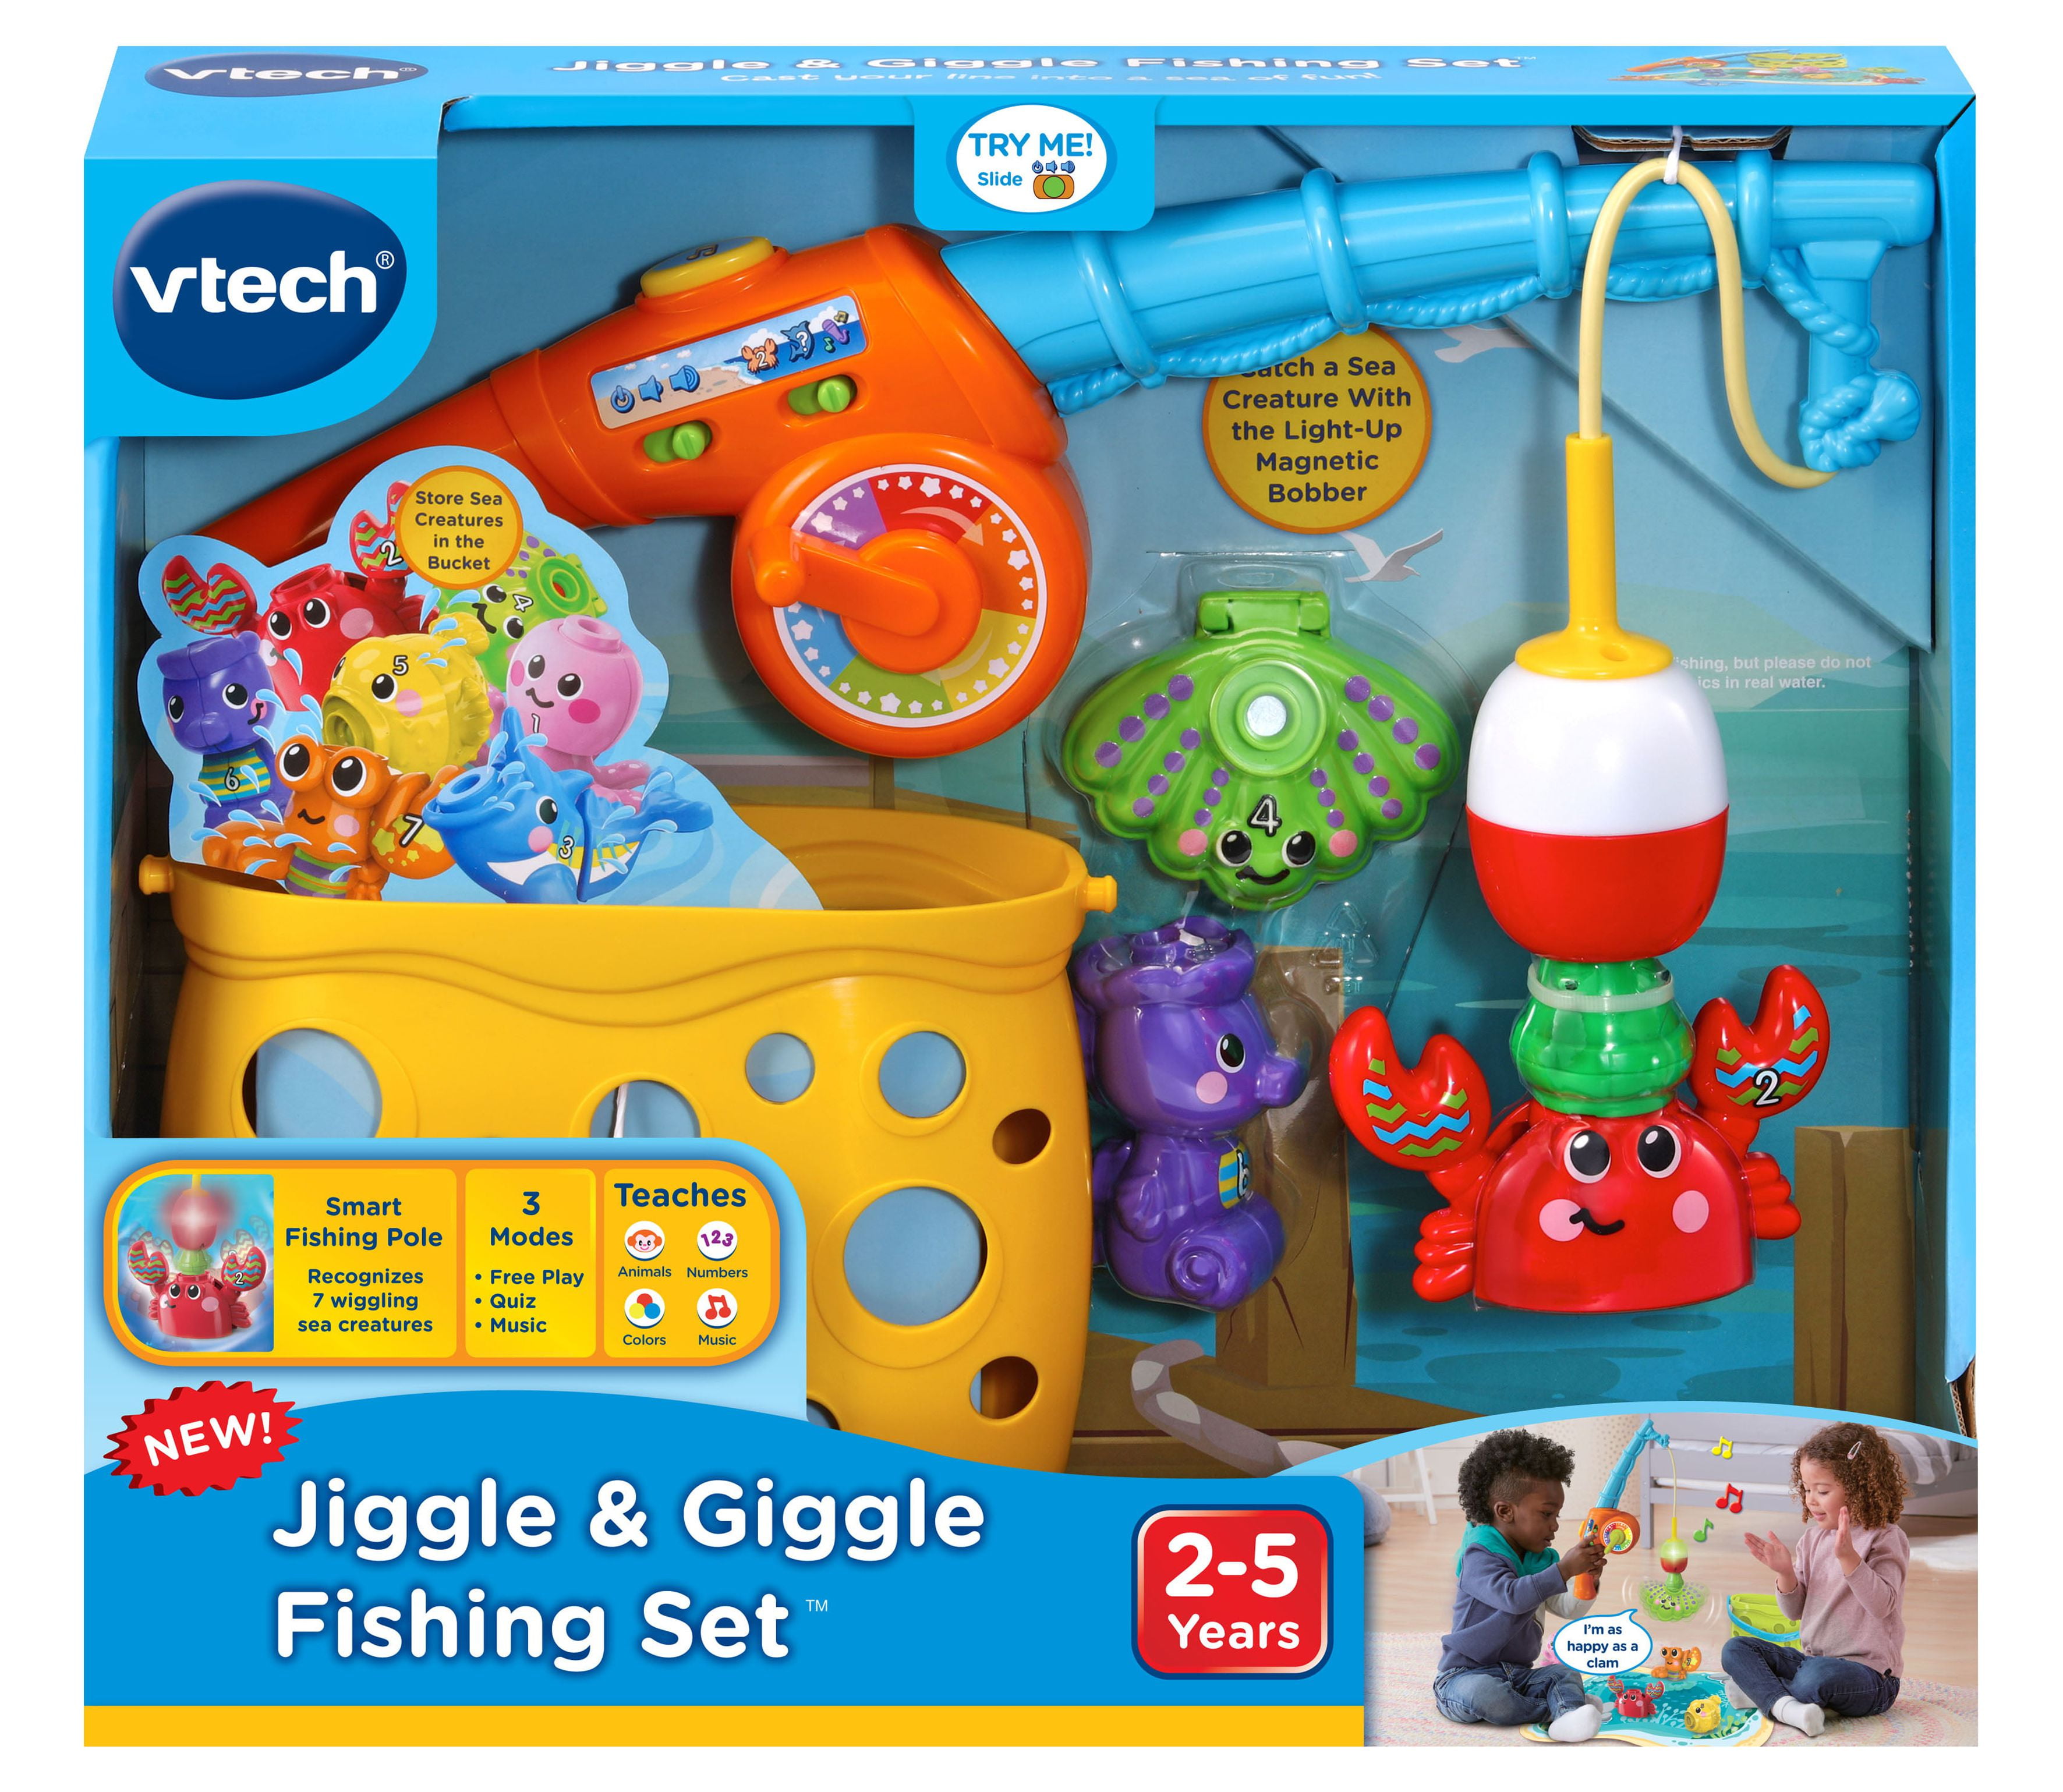 Vtech Jiggle And Giggle Fishing Set Replacement Shark/Whale Piece #3